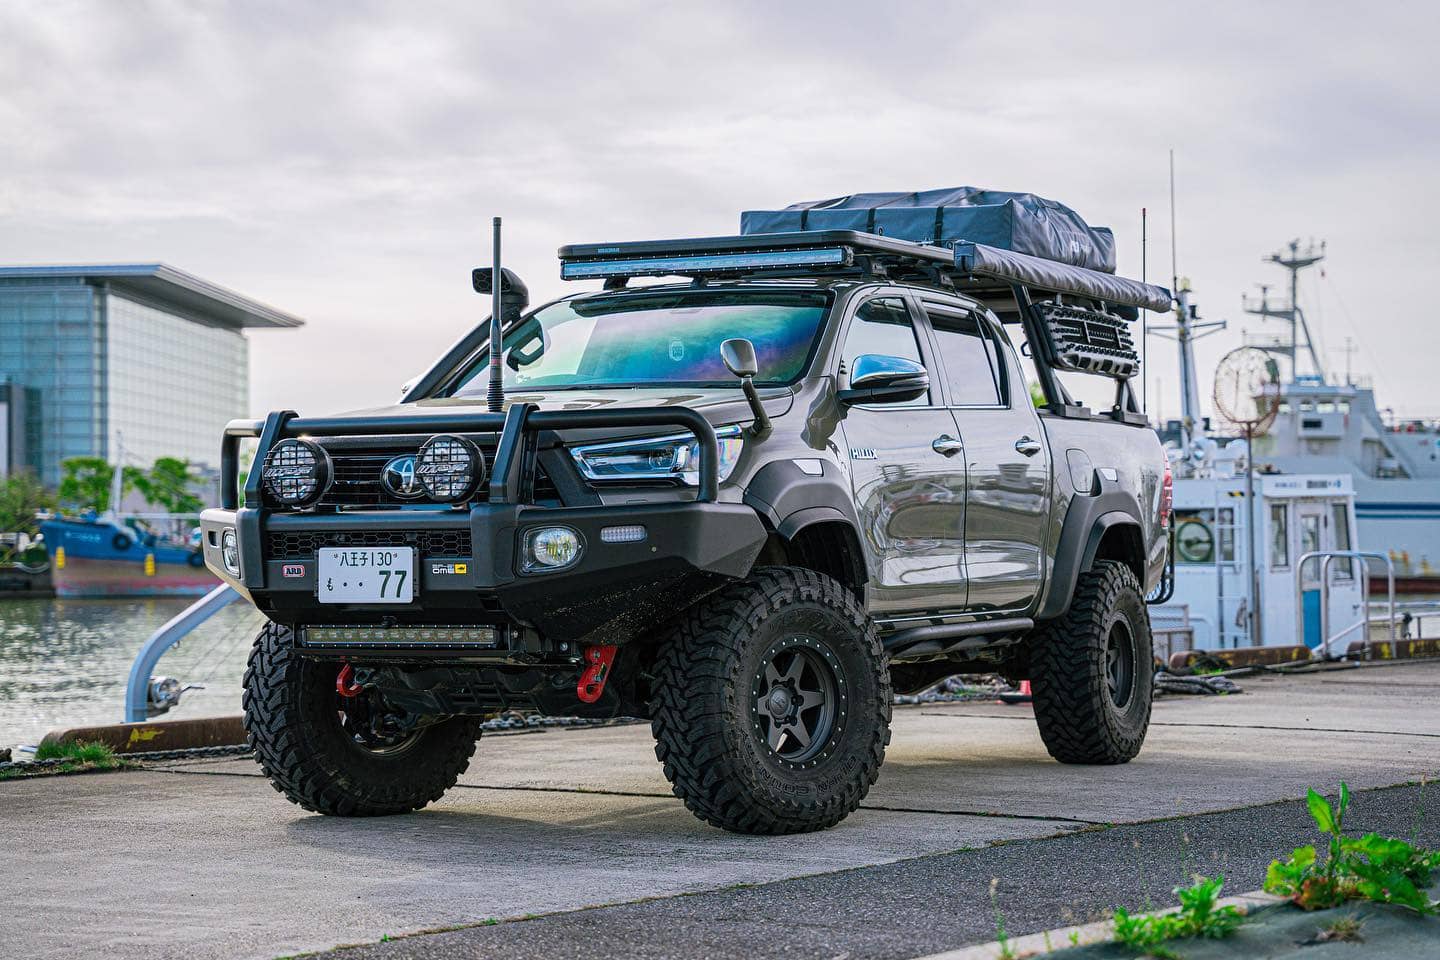 Lifted toyota hilux overlander on 35" tires